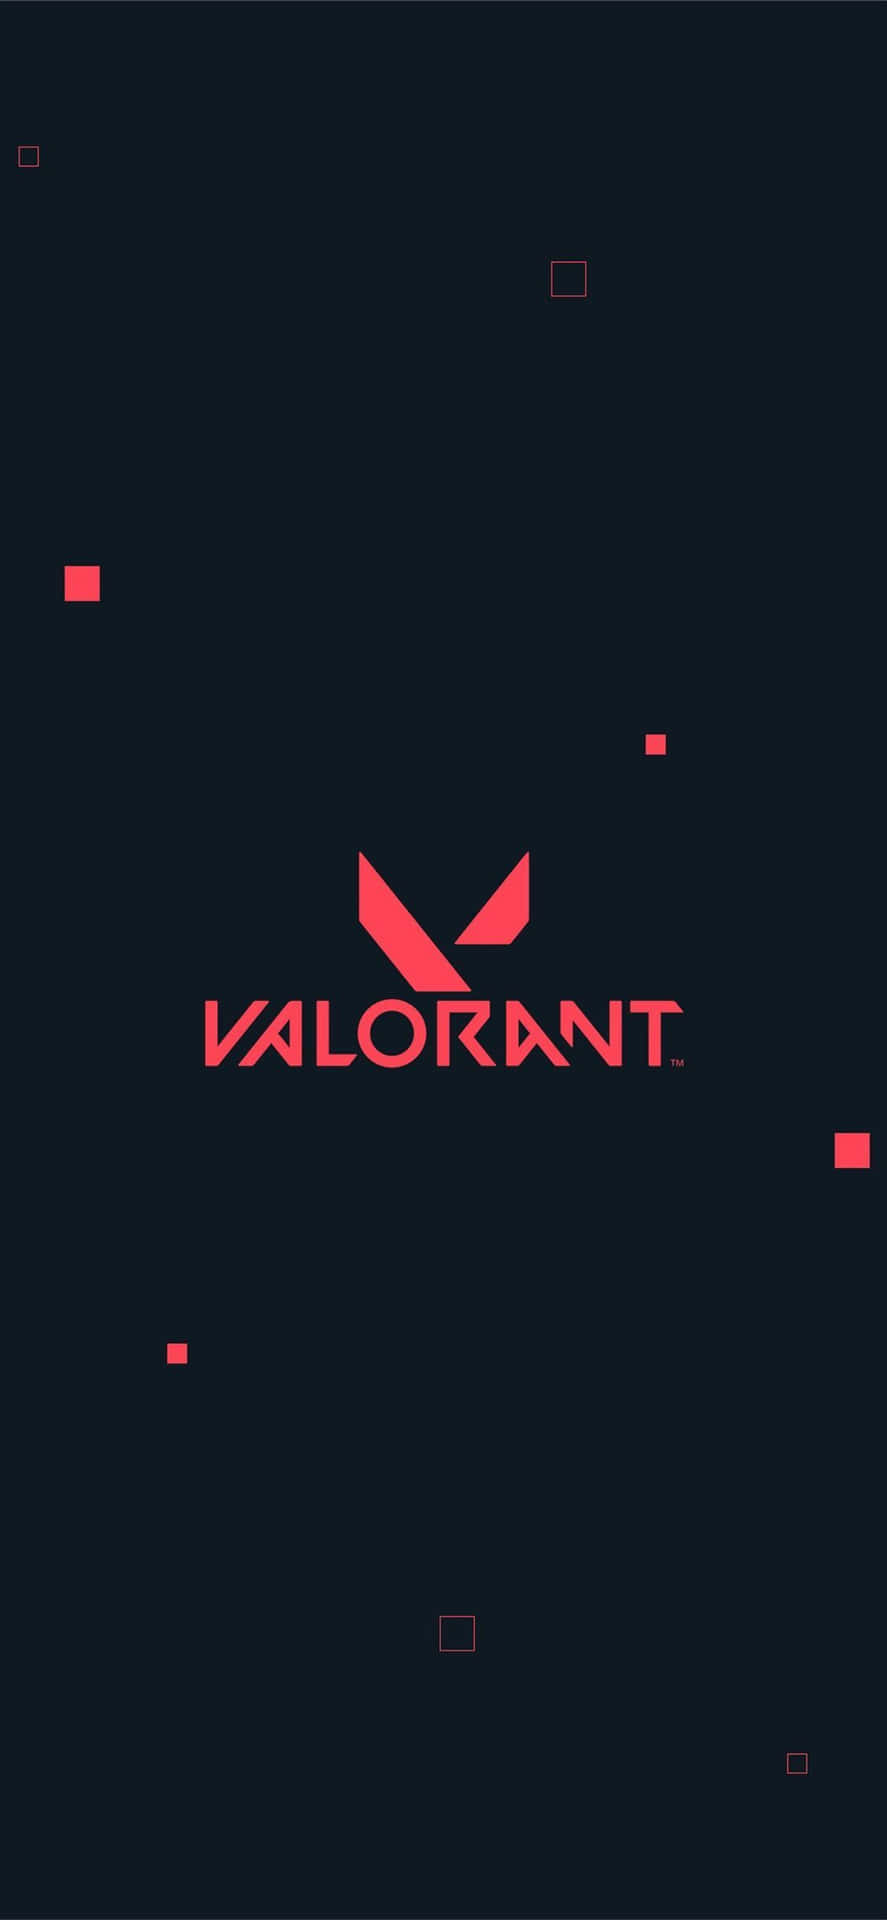 Experience Valorant on the Iphone X